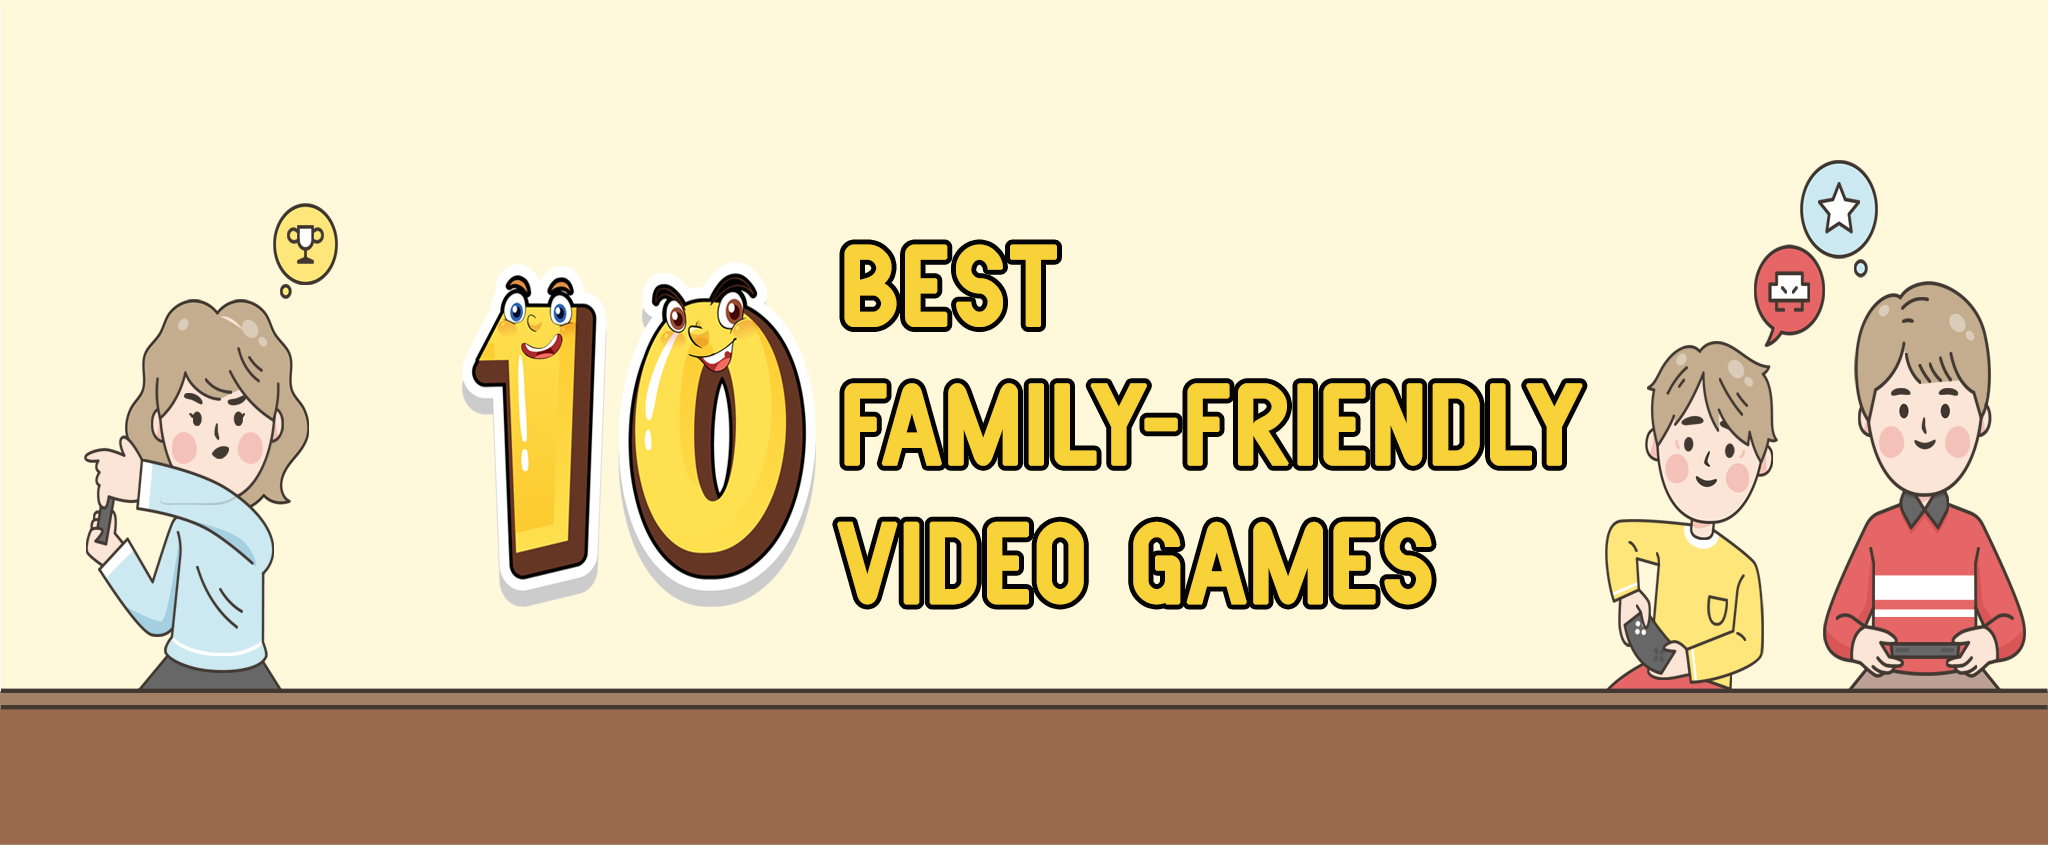 10 Best Family-Friendly Video Games_1